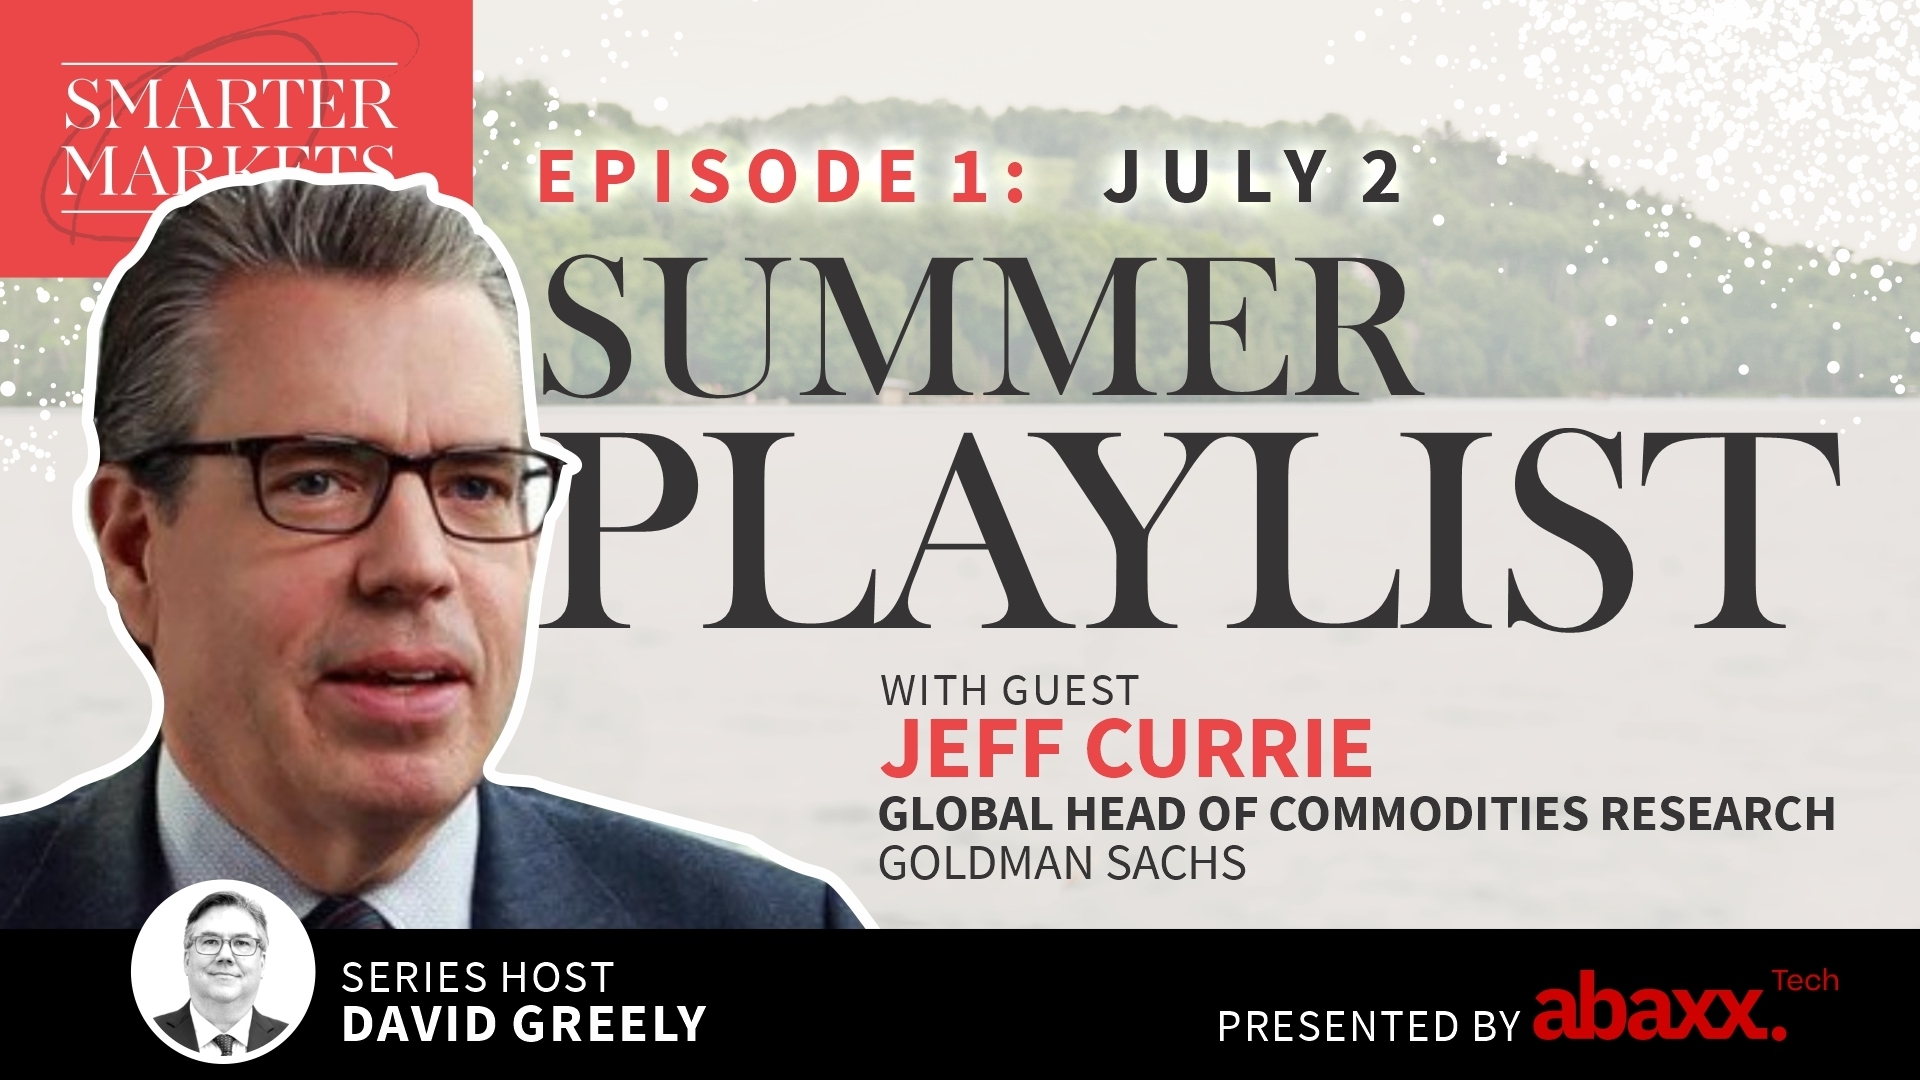 Summer Playlist Episode 1 | Jeff Currie, Global Head of Commodities Research, Goldman Sachs